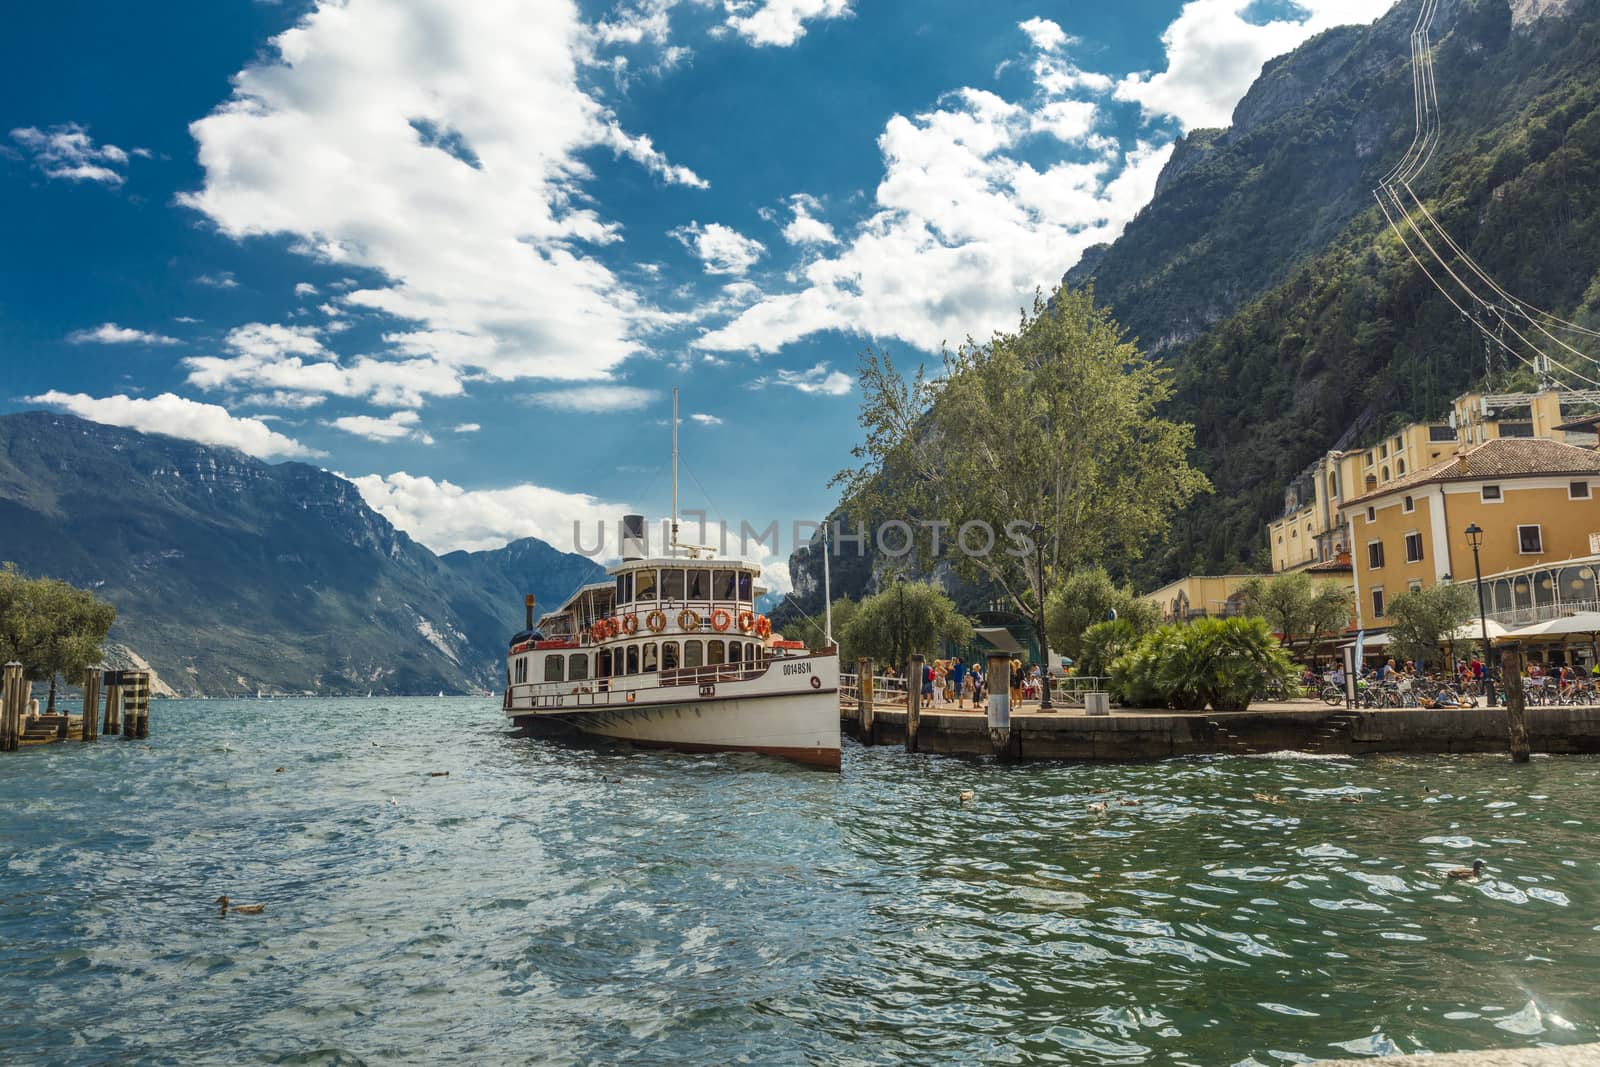 Lake Garda, Italy, Europe, August 2019, A view of the paddle ste by ElectricEggPhoto